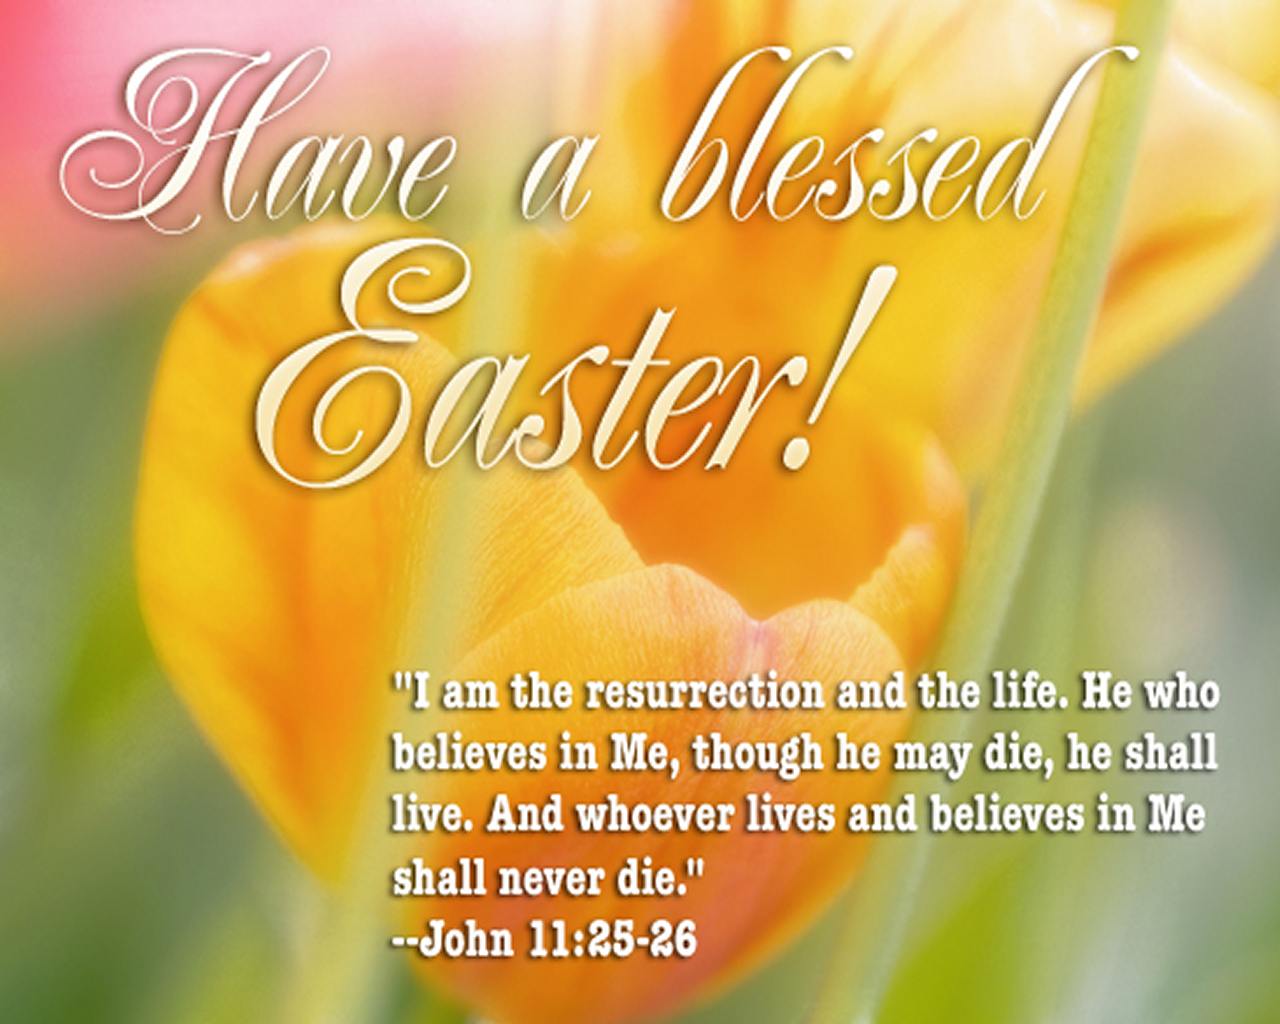 Easter weekend quotes and saying. Sharing nice quotes from